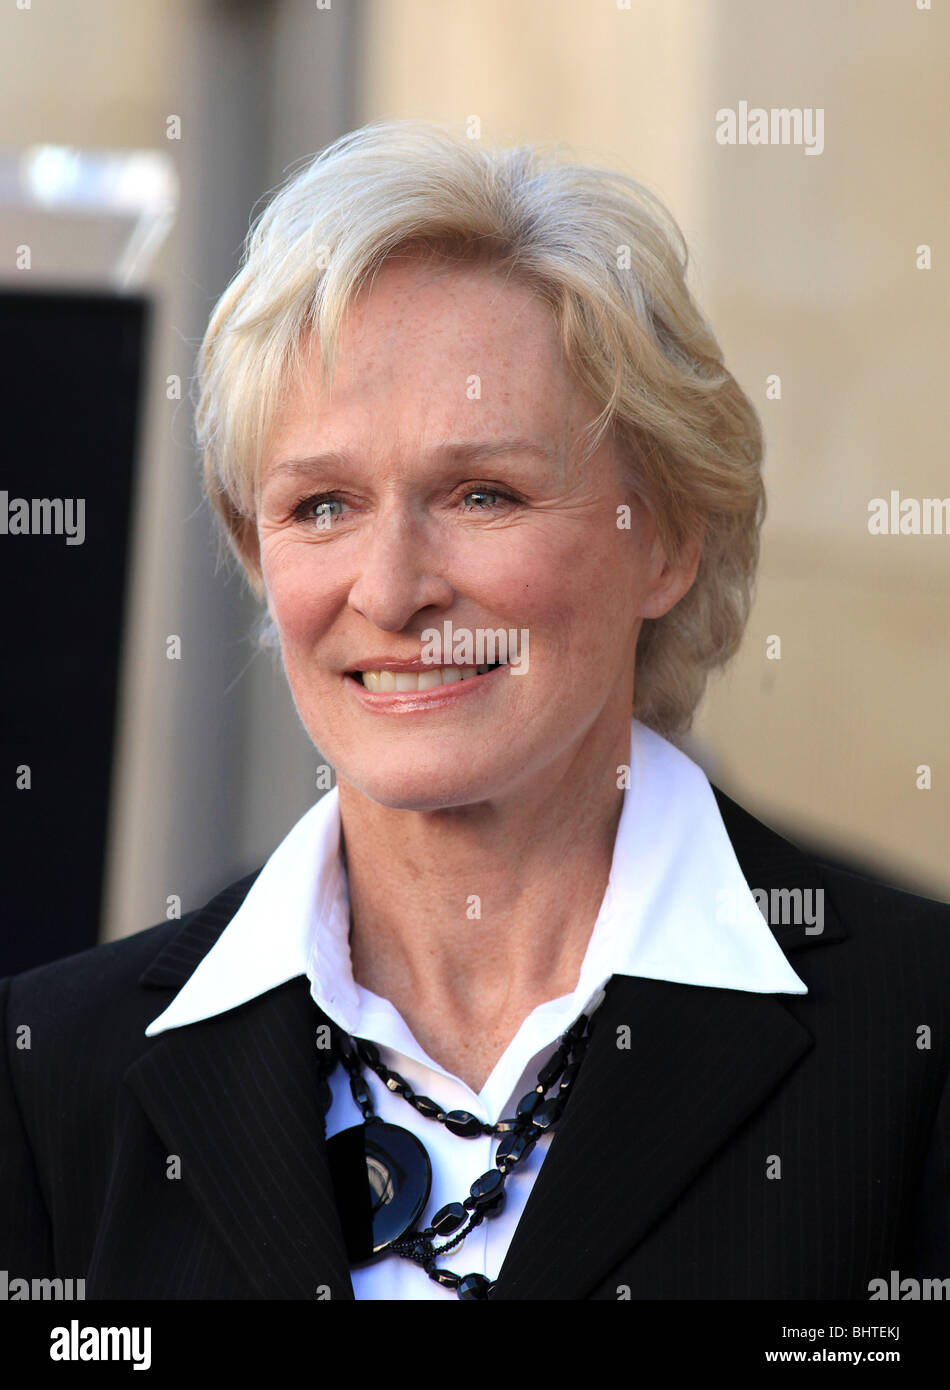 GLENN CLOSE GLENN CLOSE HONORED WITH A STAR ON THE HOLLYWOOD WALK OF FAME HOLLYWOOD LOS ANGELES CA USA 12 January 2009 Stock Photo